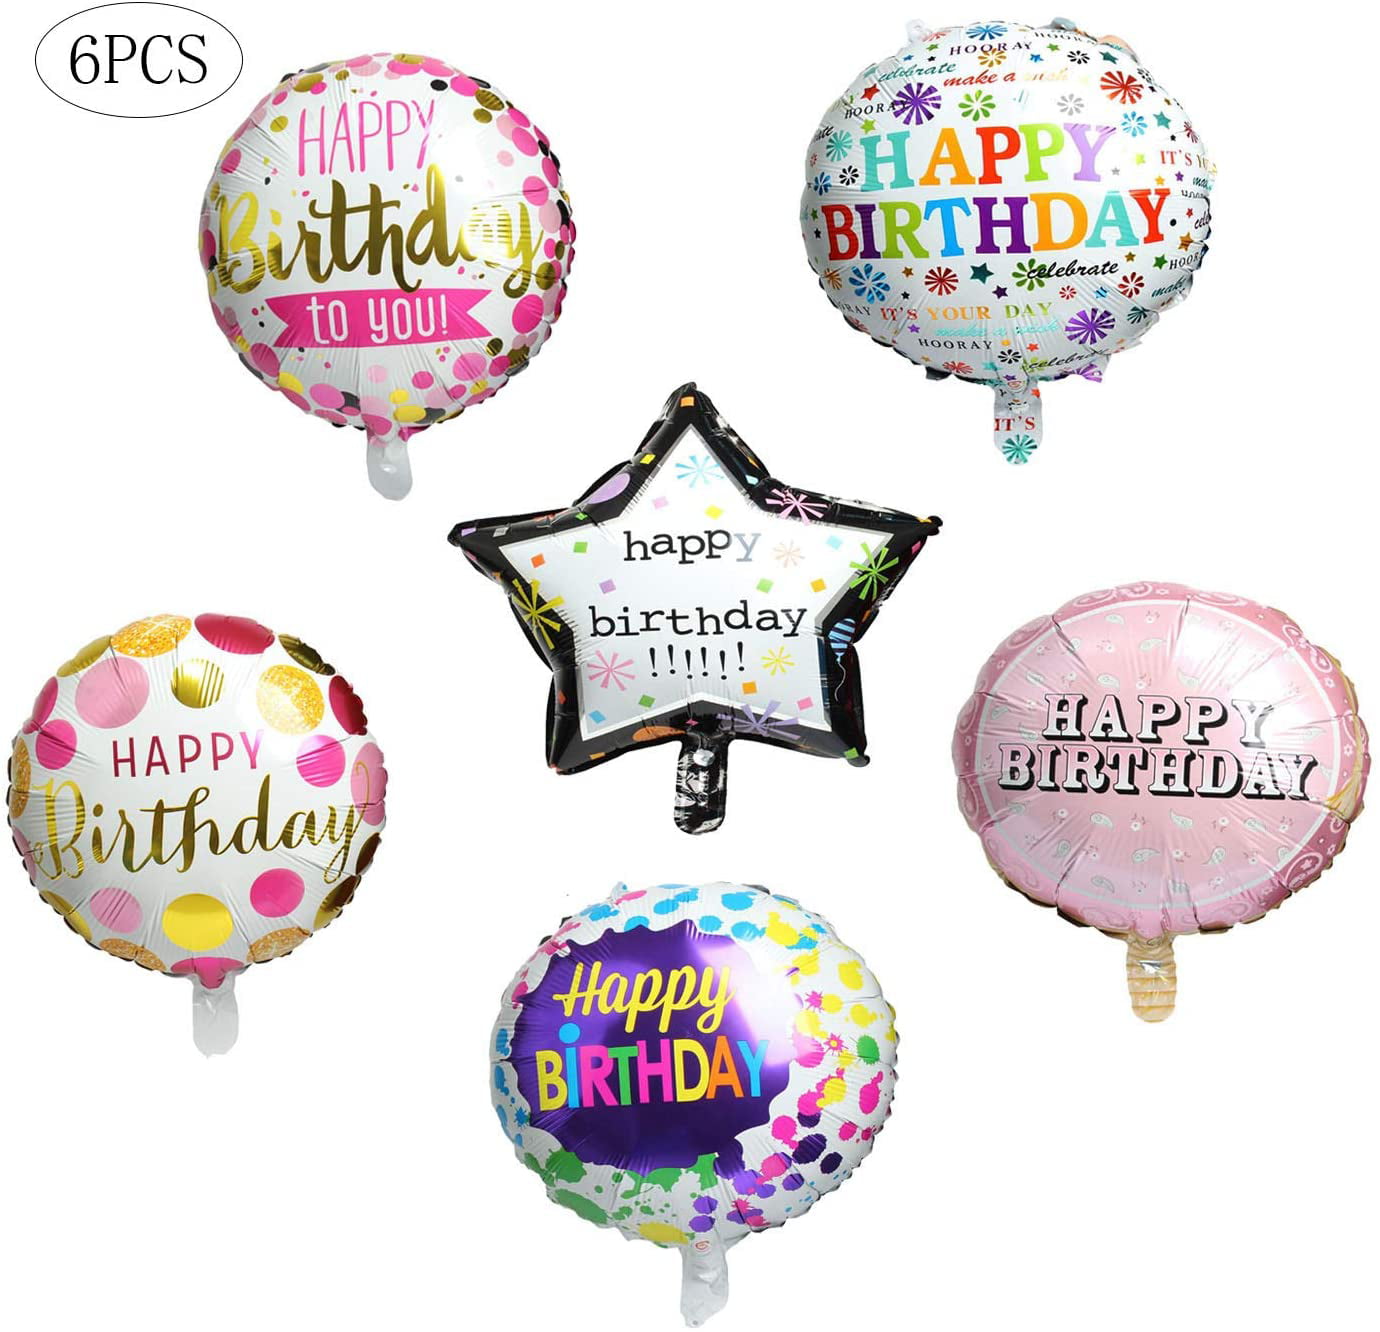 18 Inch Happy Birthday Balloons Round Foil Mylar Helium Letter Balloon Colorful Birthday Party Decoration Supplies of 6 Pack